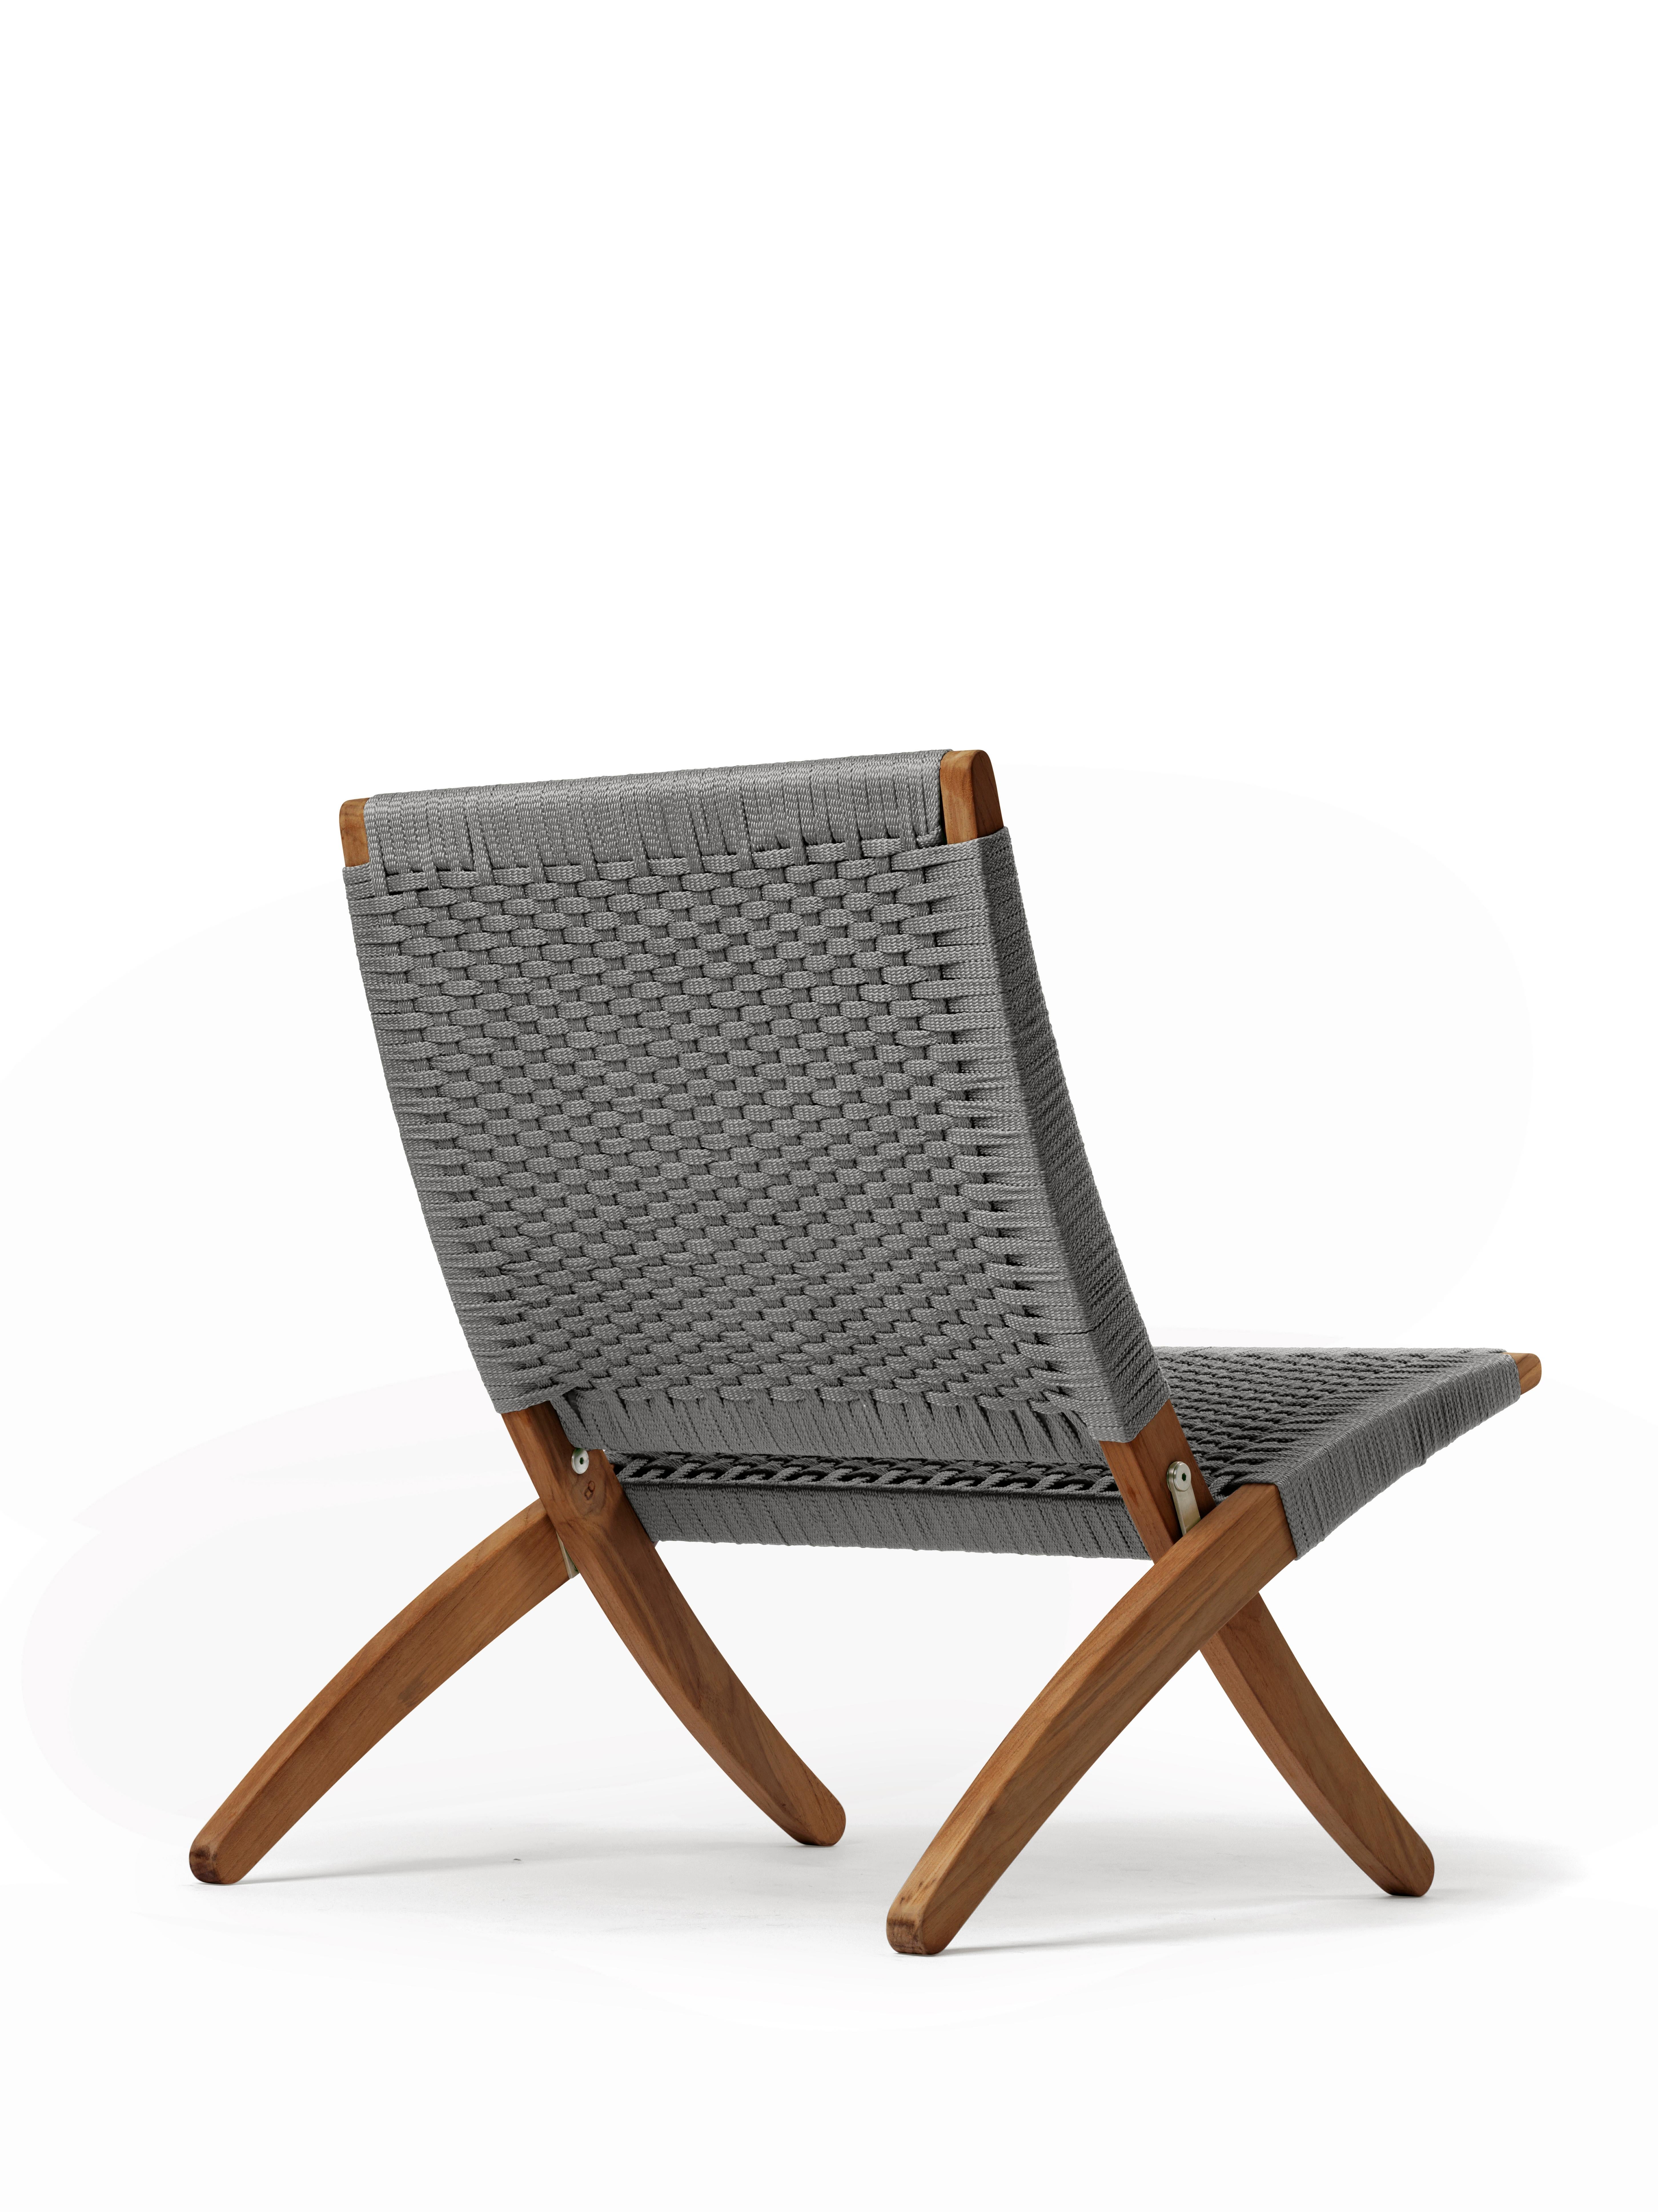 Designed by Morten Gøttler in 1997, the MG501 Cuba chair captures contemporary design with its ideal balance of form and function, and nods to previous masters who experimented with elevating the folding chair concept. Designed by Morten Gøttler in